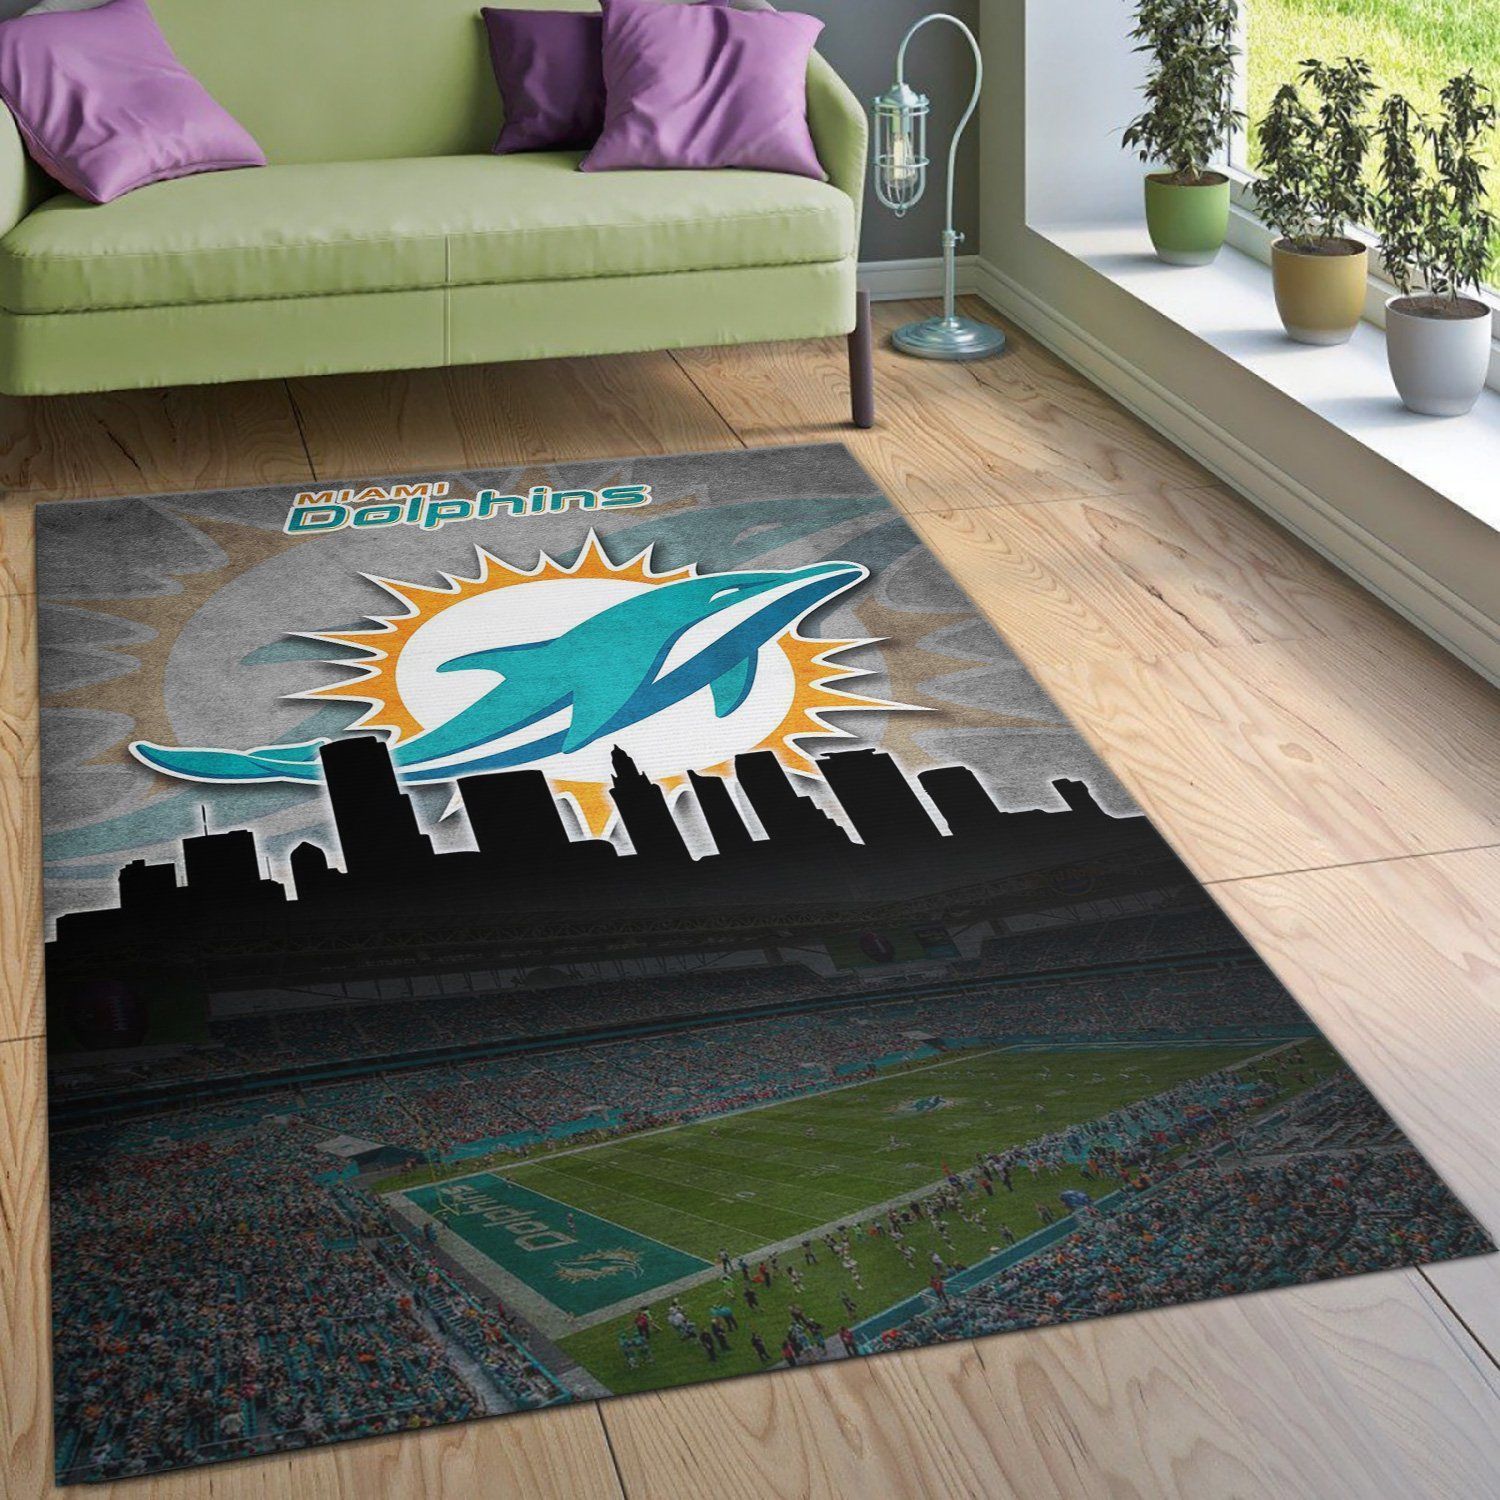 Miami Dolphins NFL Area Rug Bedroom Rug Christmas Gift US Decor - Indoor Outdoor Rugs